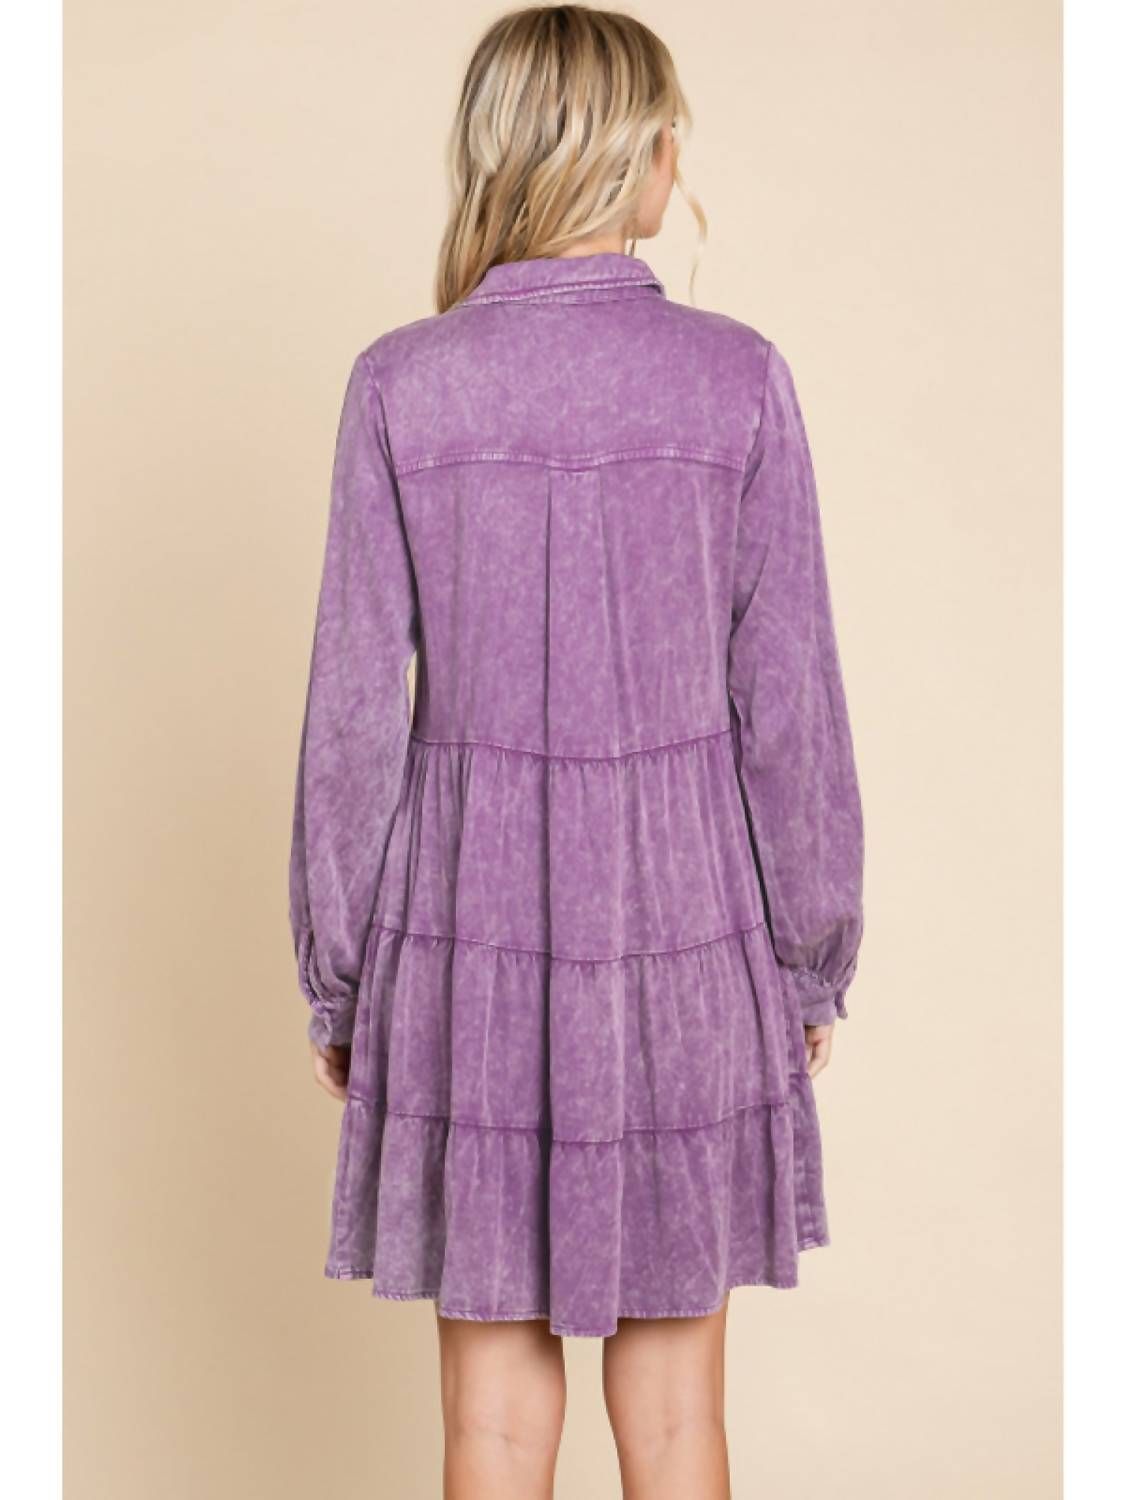 Style 1-3579879950-921 Jodifl Size 2X Long Sleeve Sheer Purple Cocktail Dress on Queenly